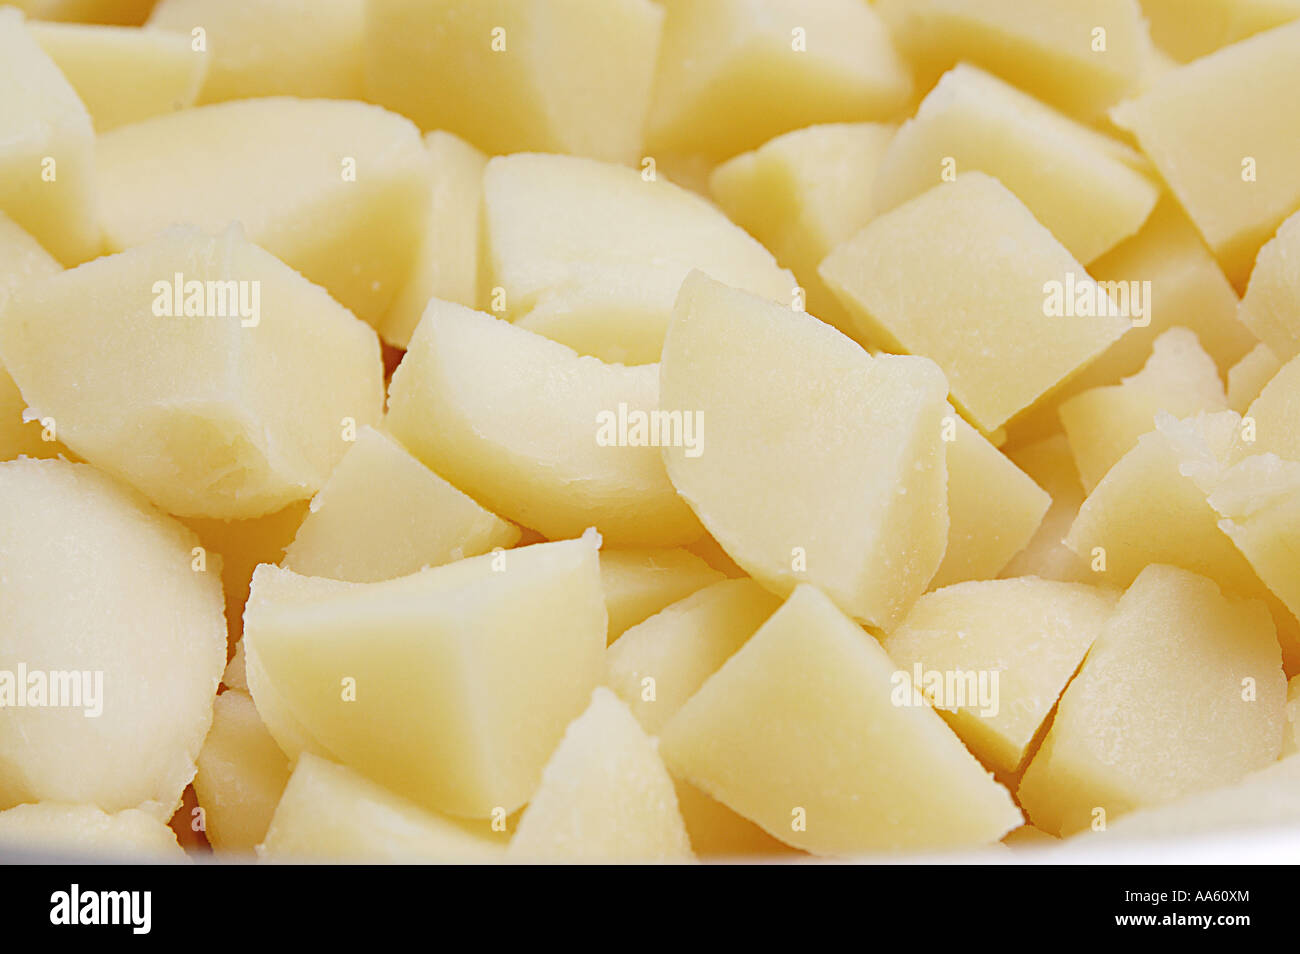 Boiled potatoes cooked cut in triangular pieces Stock Photo